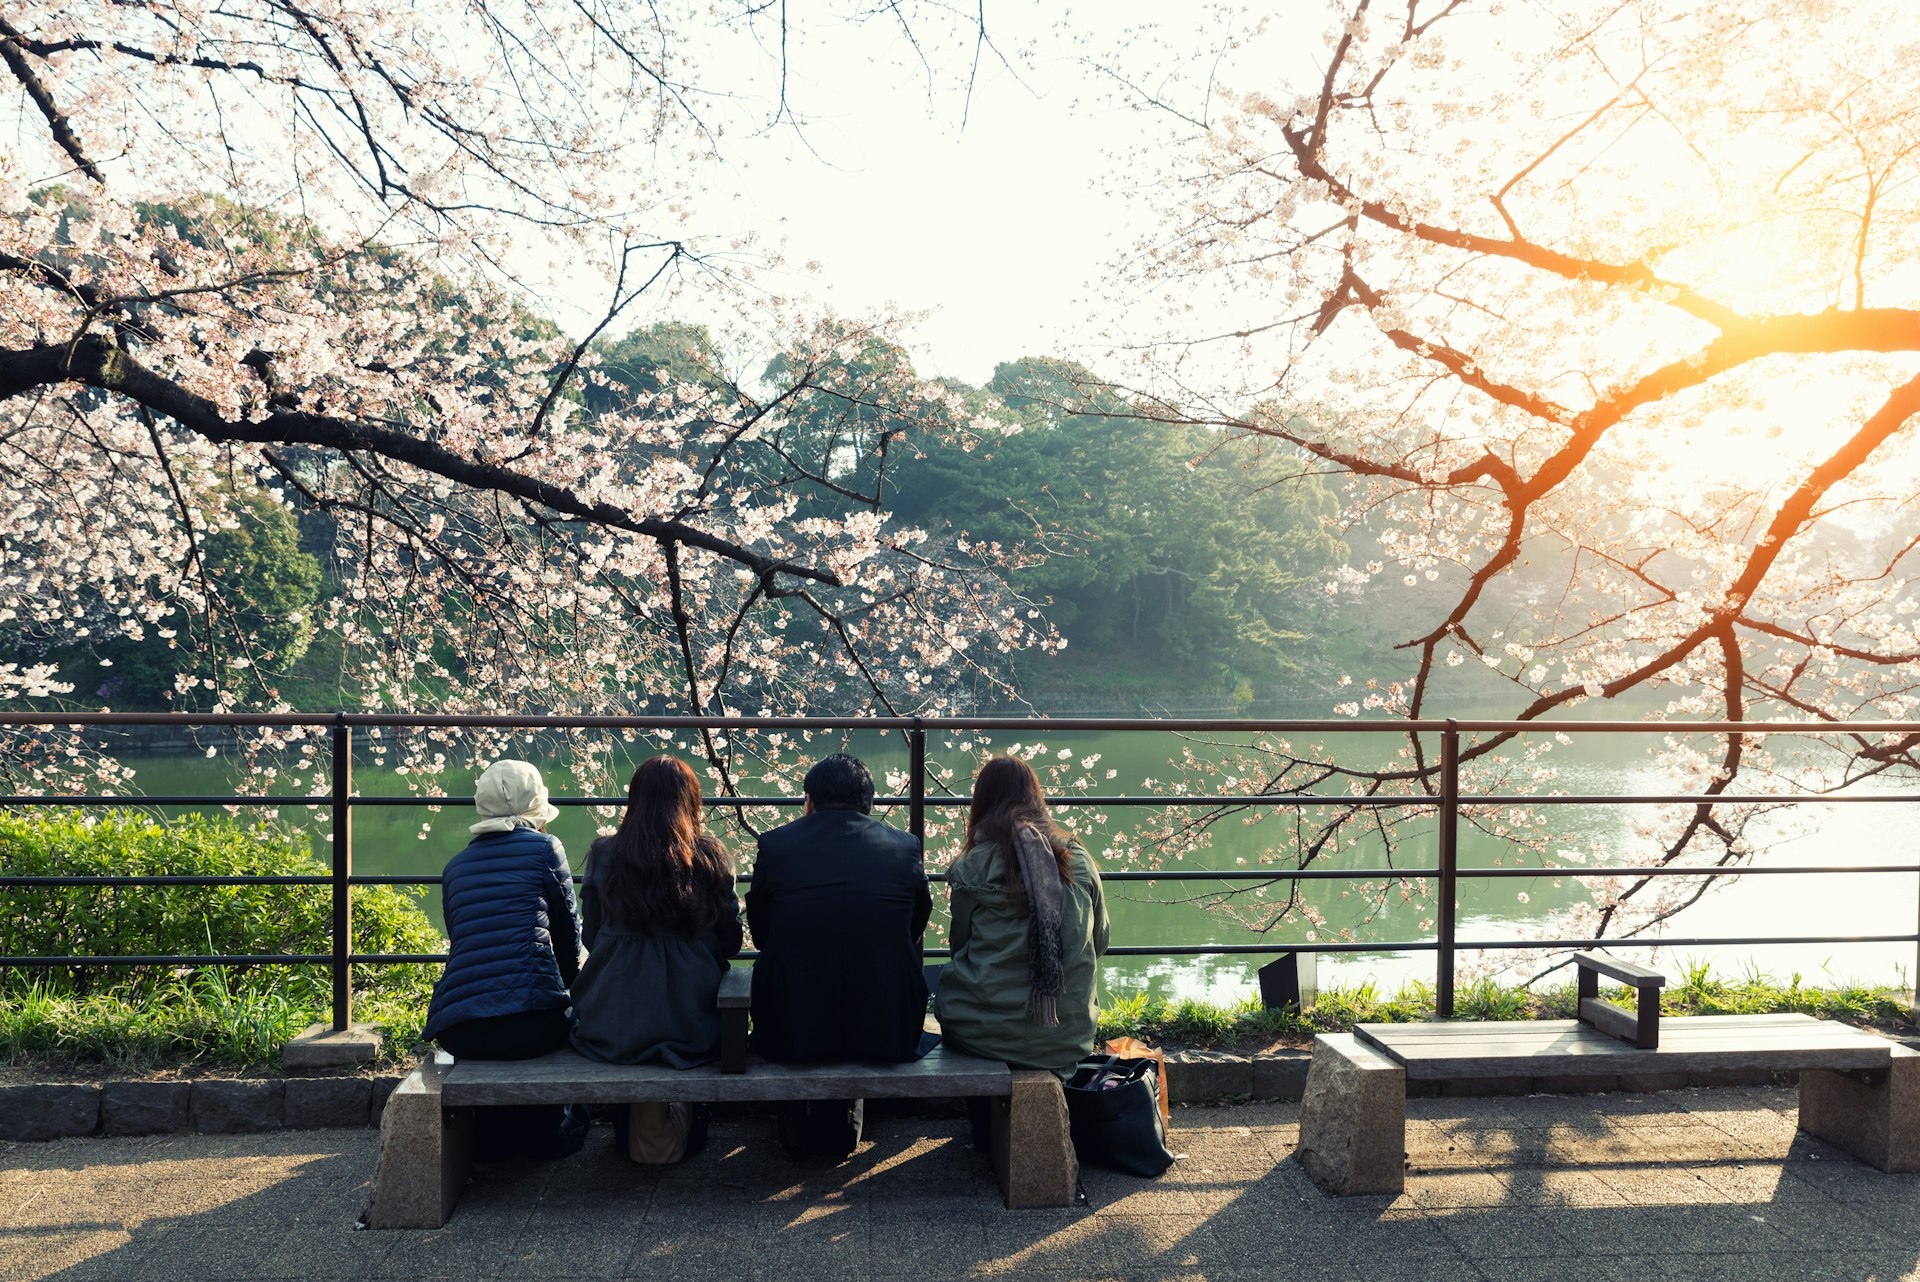 Four people sit on a bench by a lake in a park with cherry trees in blossom, Tokyo, Japan